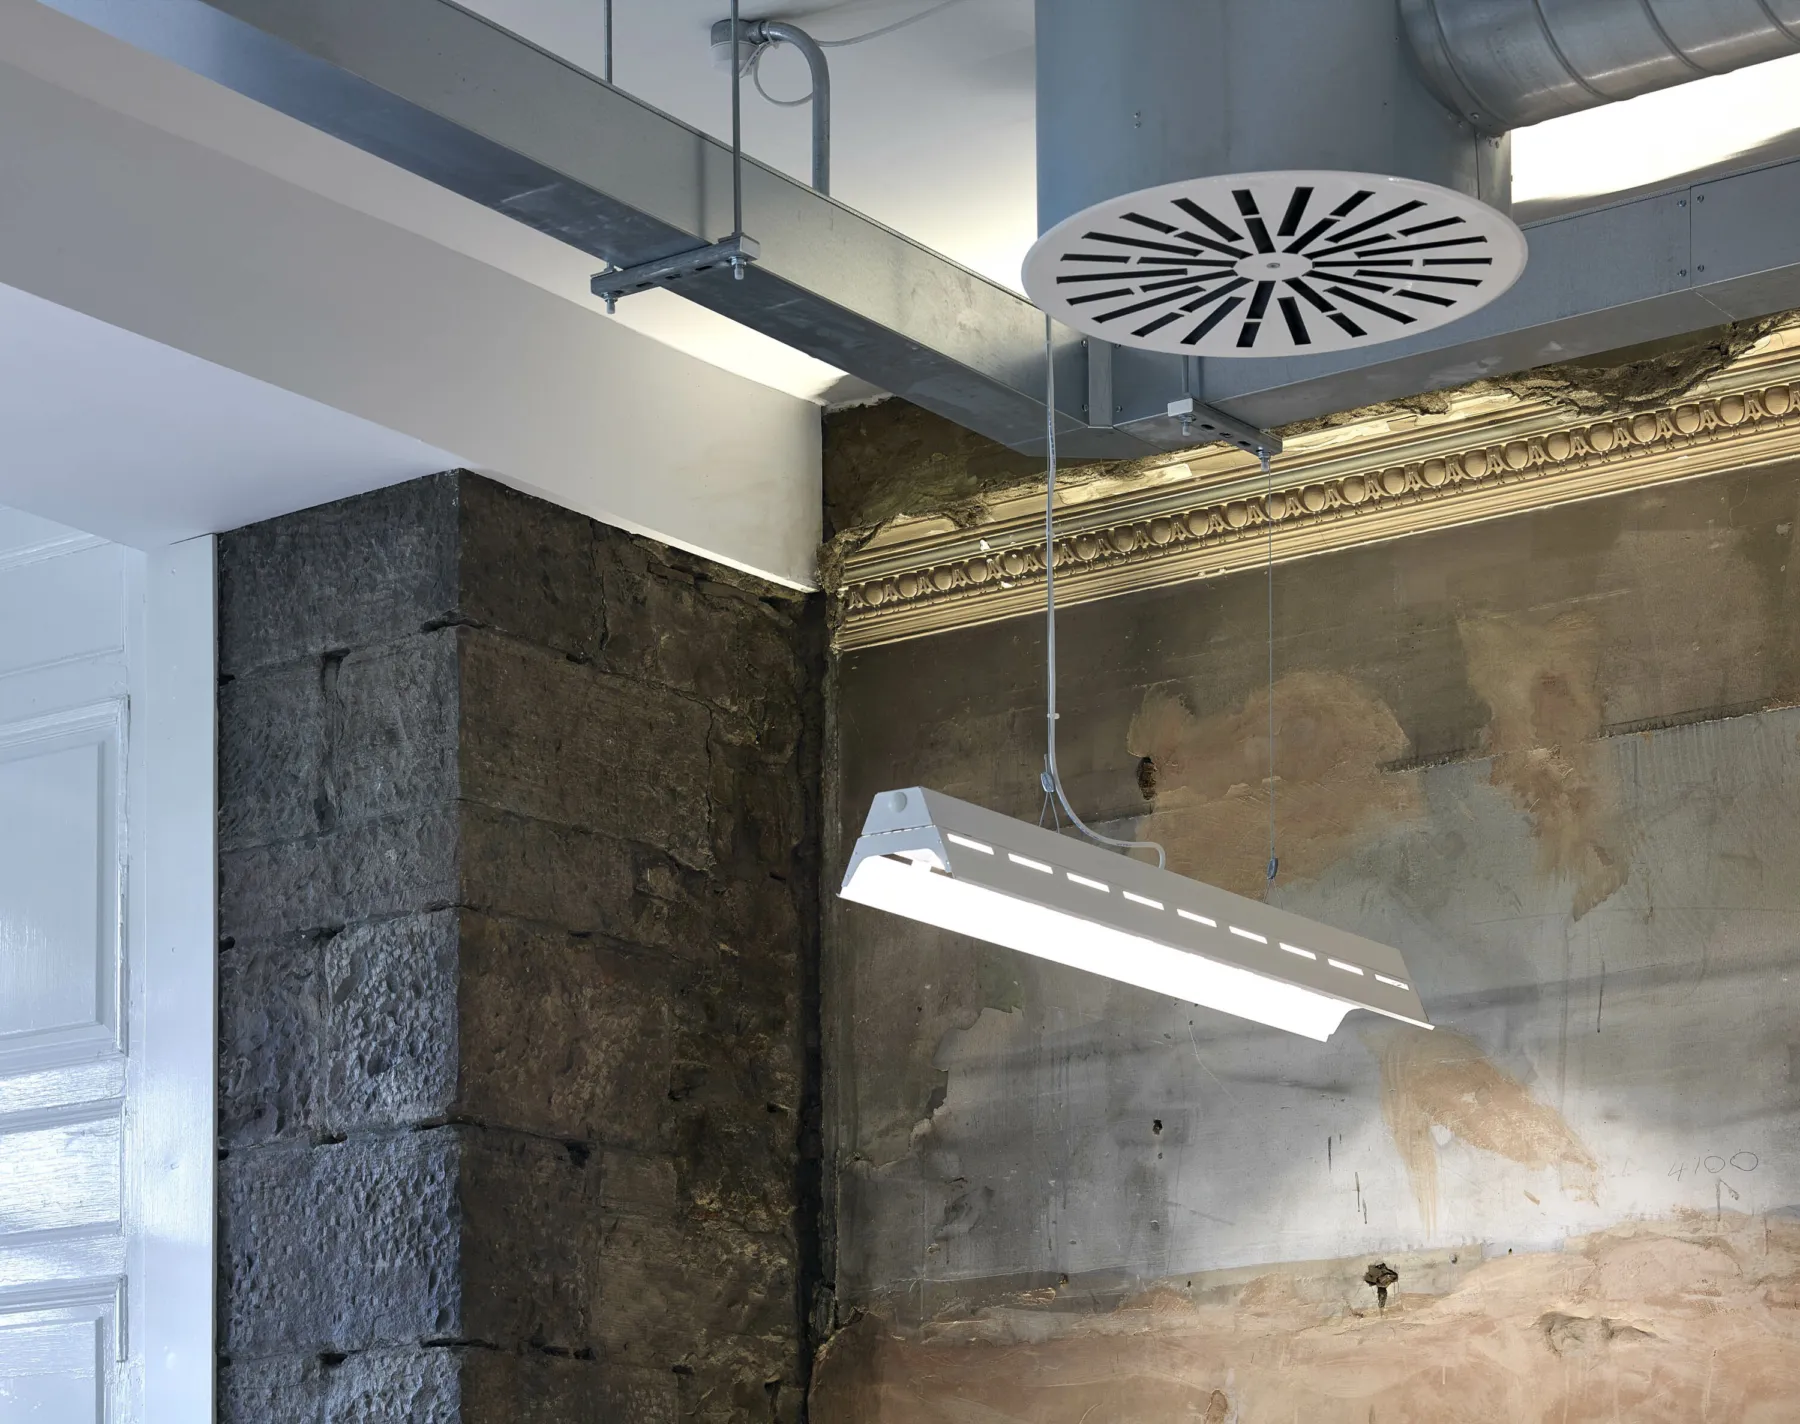 Detail of a listed building on Princes Street, Edinburgh used for offices. Exposed stone and cornicing is shown alongside galvanised steel ducting and vents. Pendant lighting illuminates the exposed plaster wall.